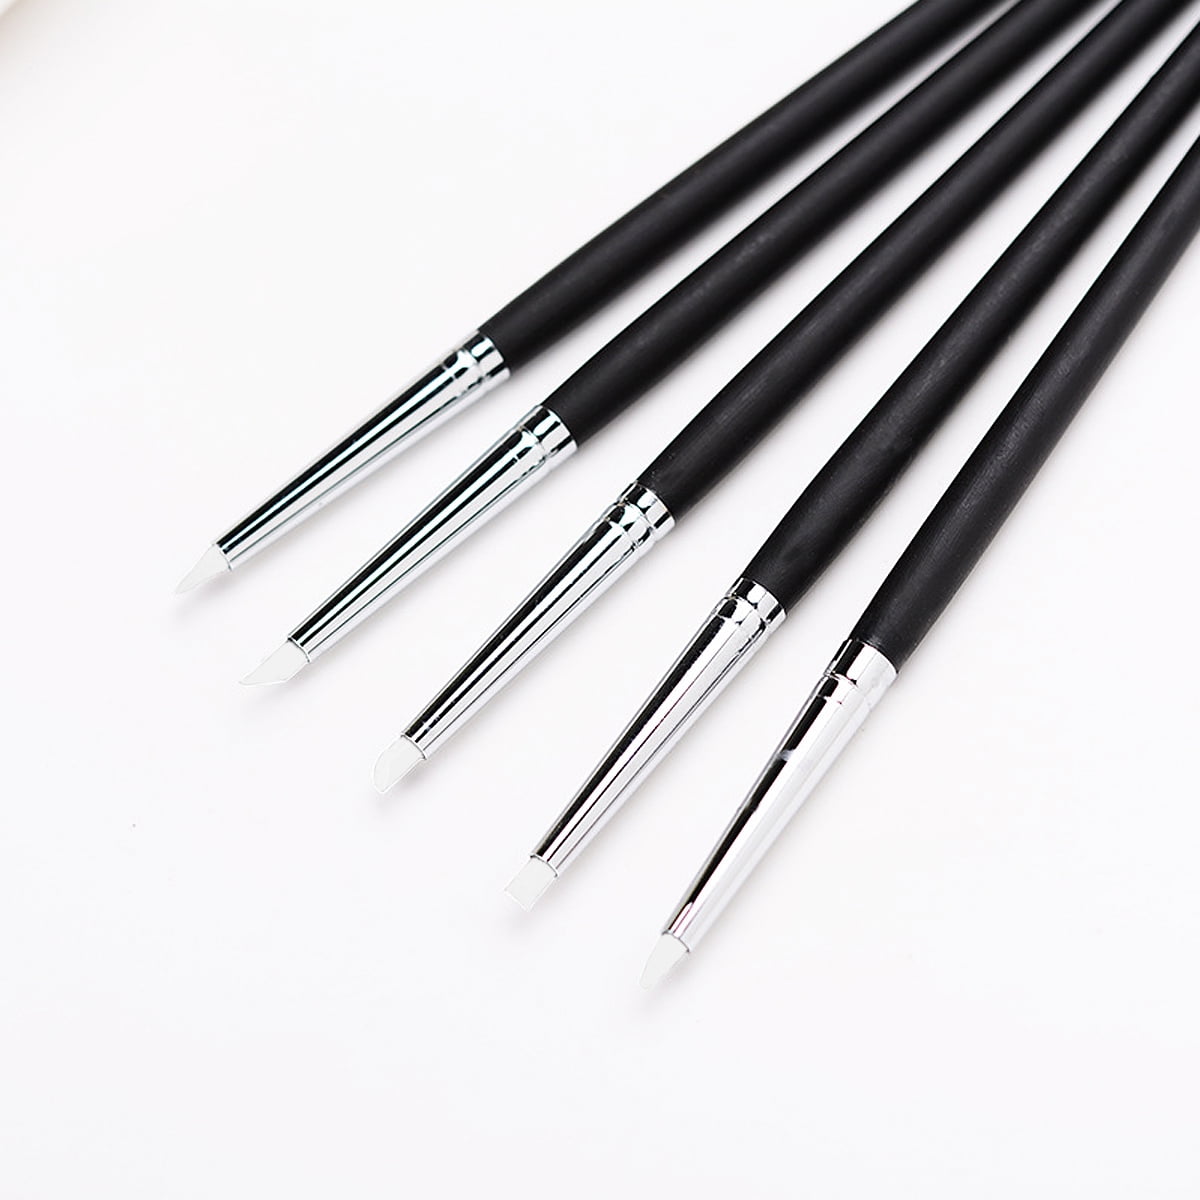 5pcs Dental Resin Brush Pens Dental Shaping Silicone Tooth Tool For ...